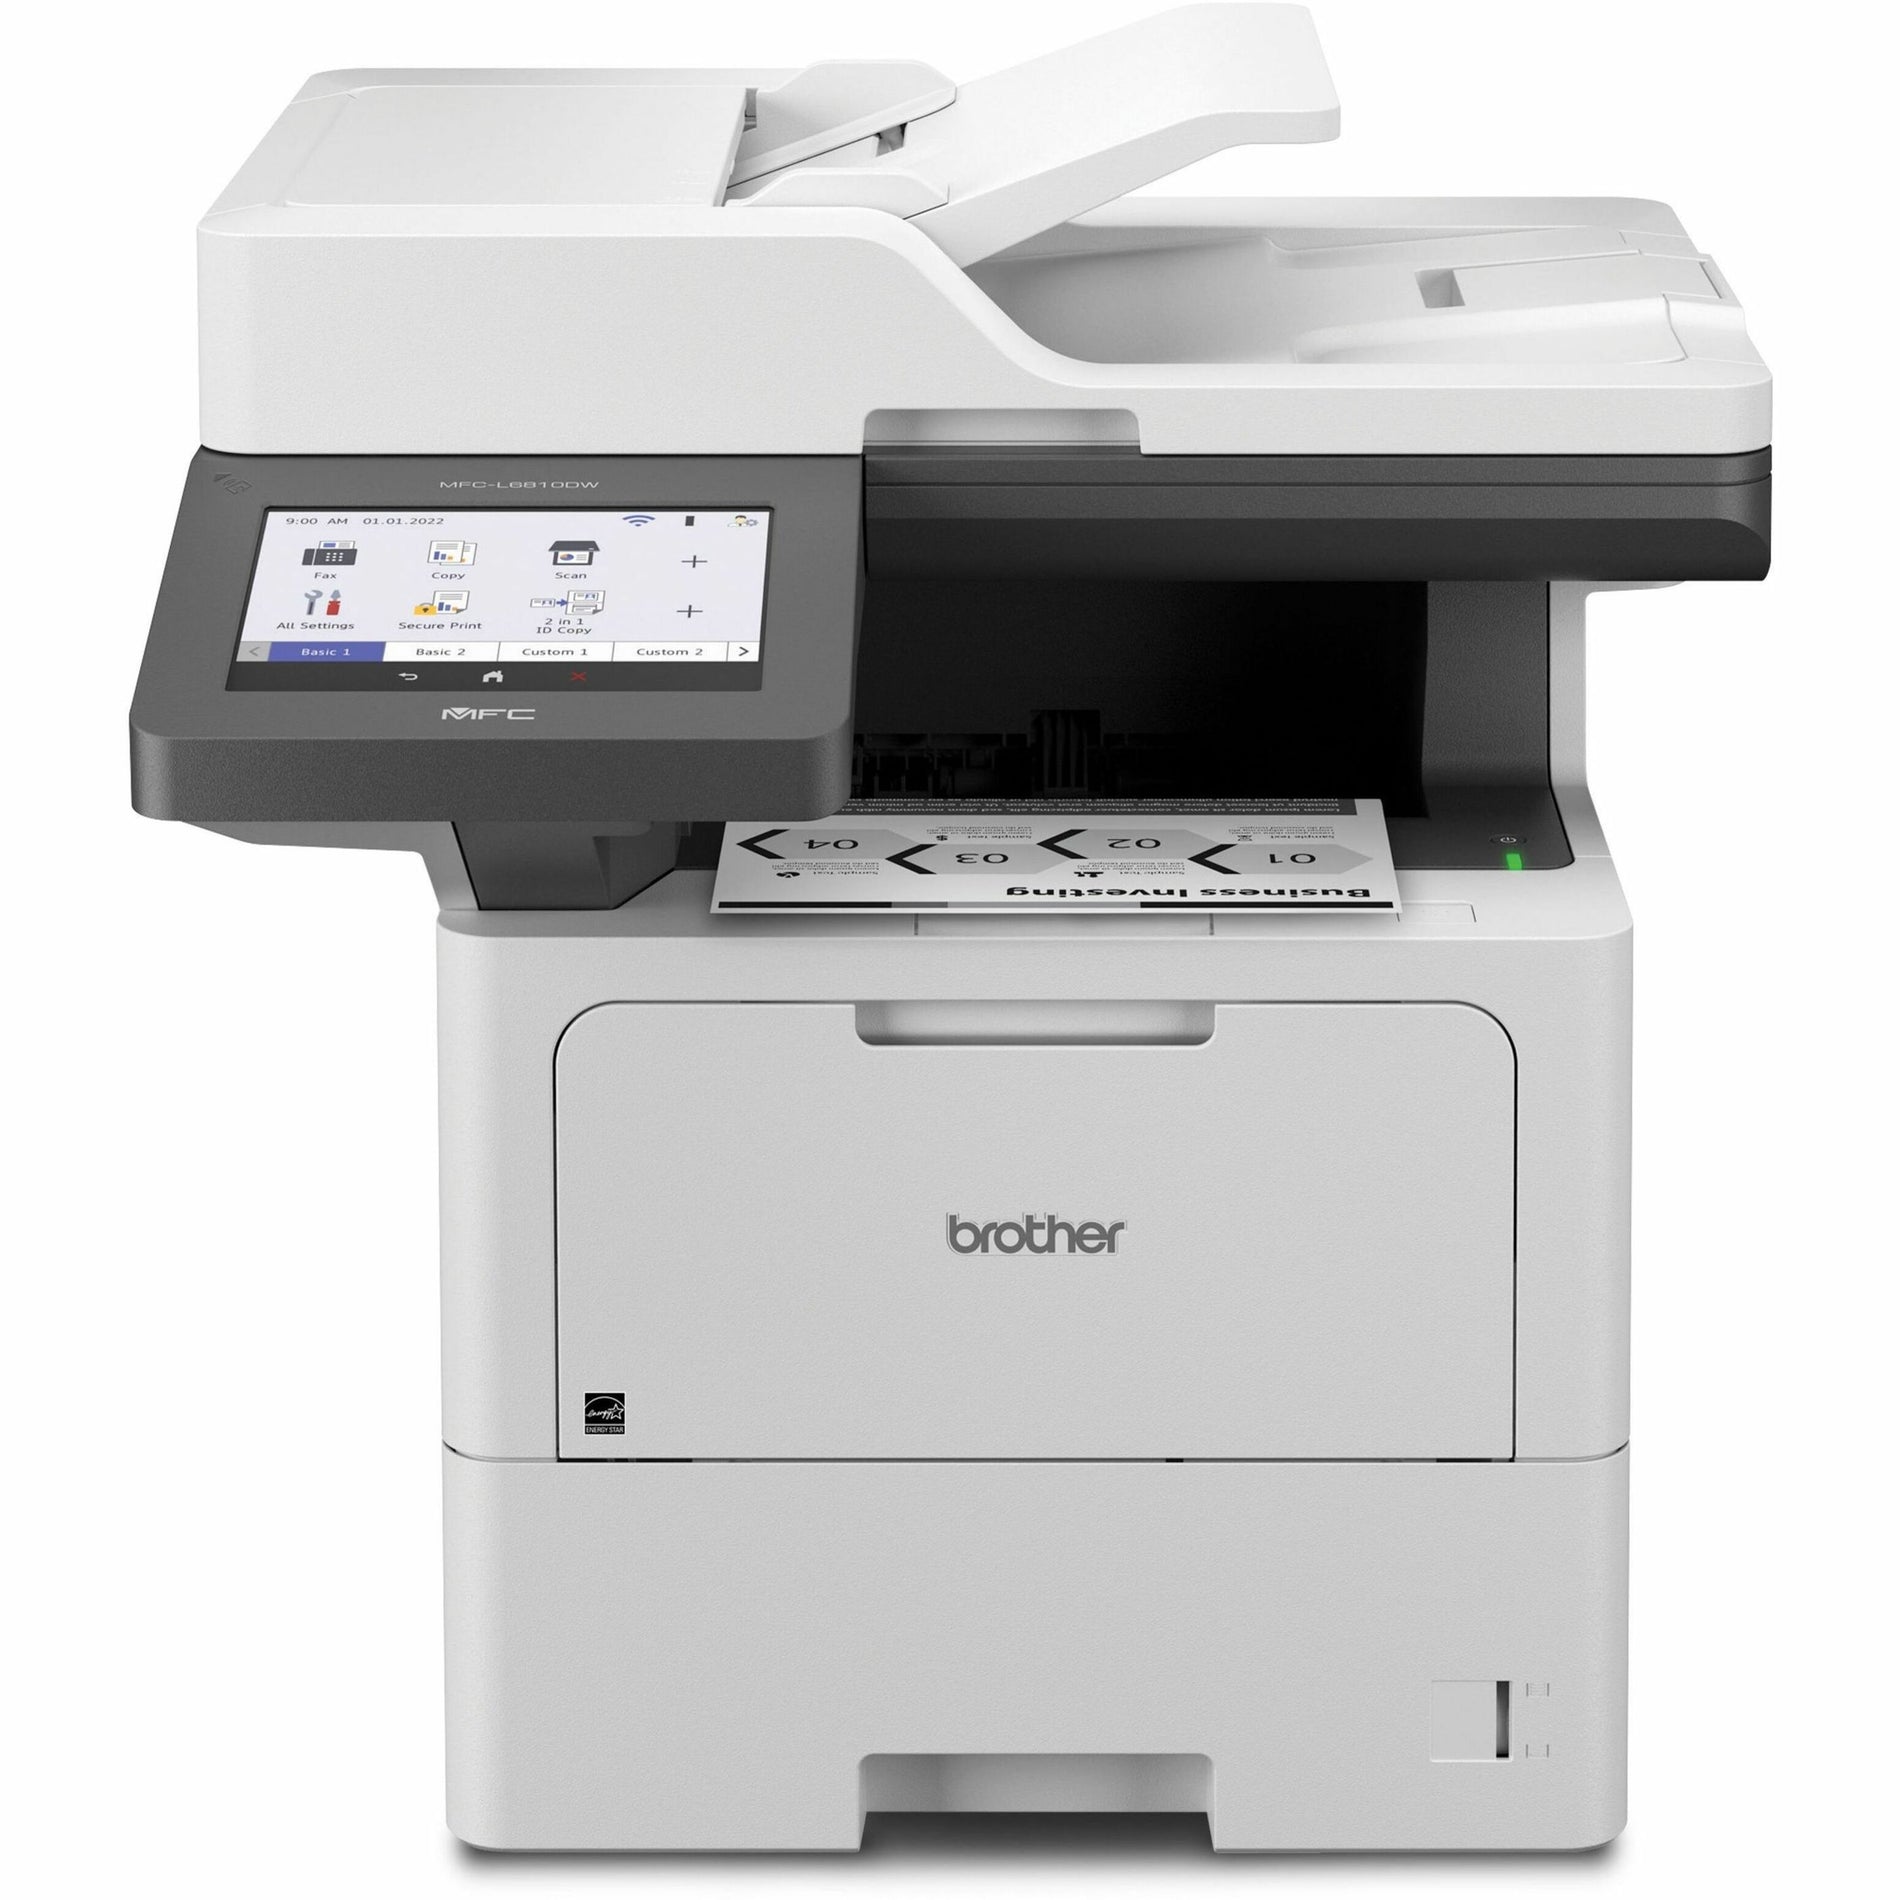 Brother MFCL6810DW MFC-L6810DW Enterprise Monochrome Laser All-in-One Printer, Low-cost Printing